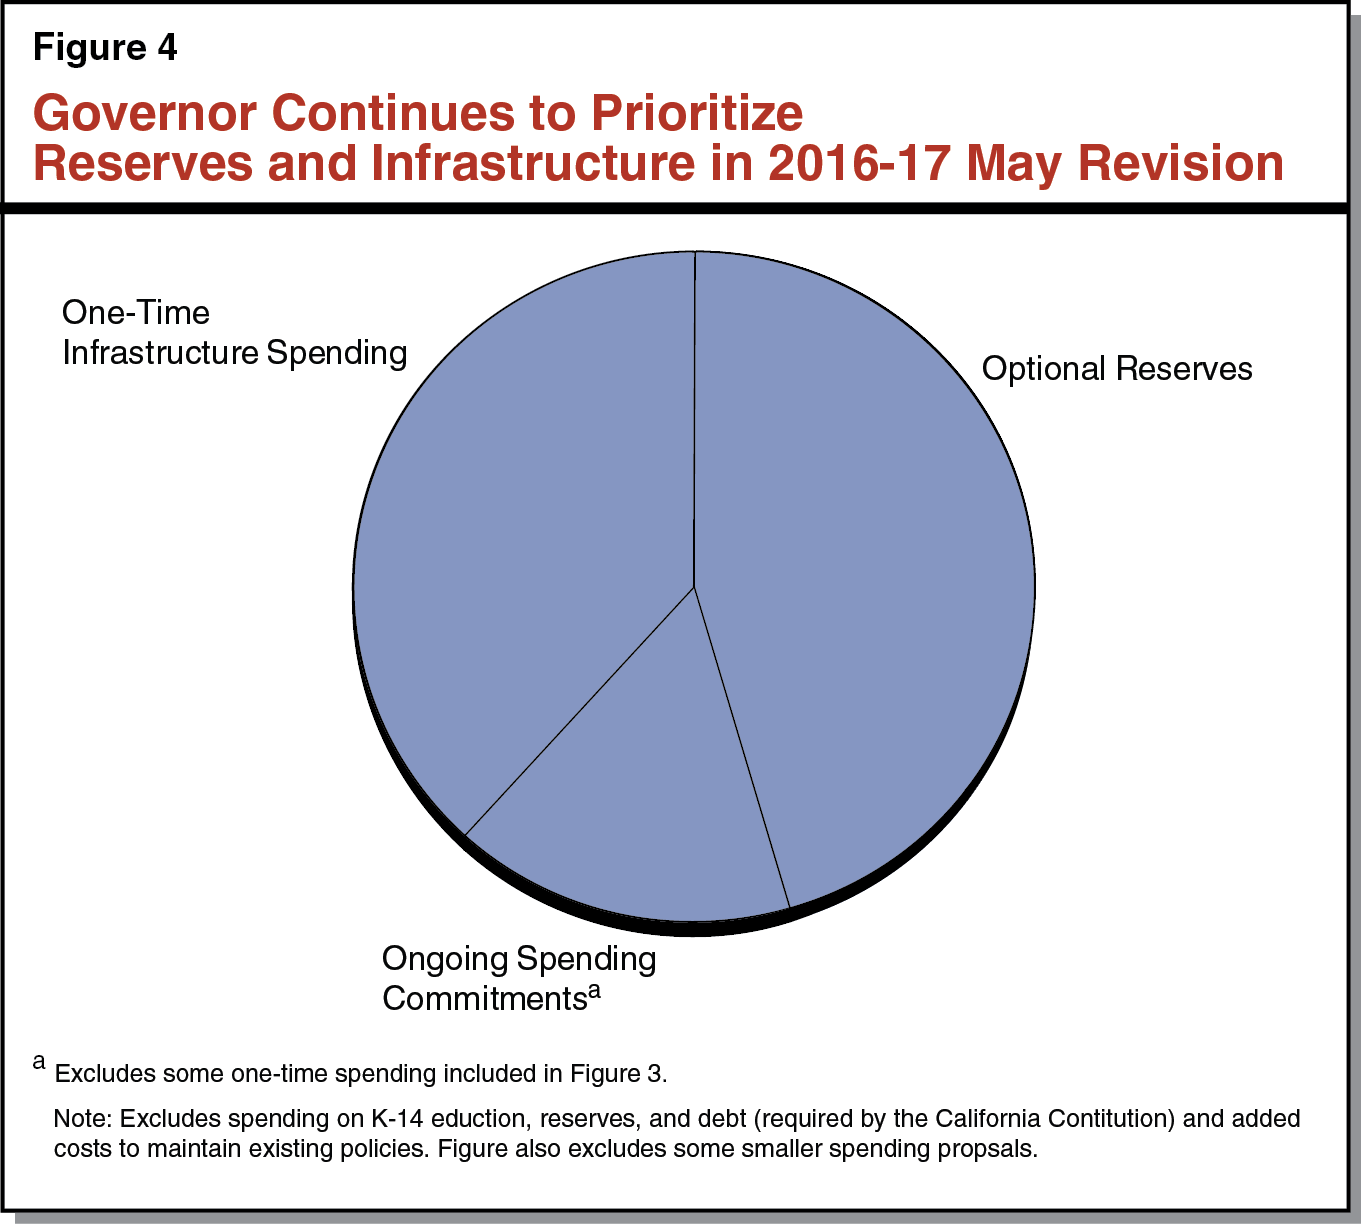 Figure 4 - Governor Continues to Prioritize Revenues and Infrastructure in 2016-17 May Revision